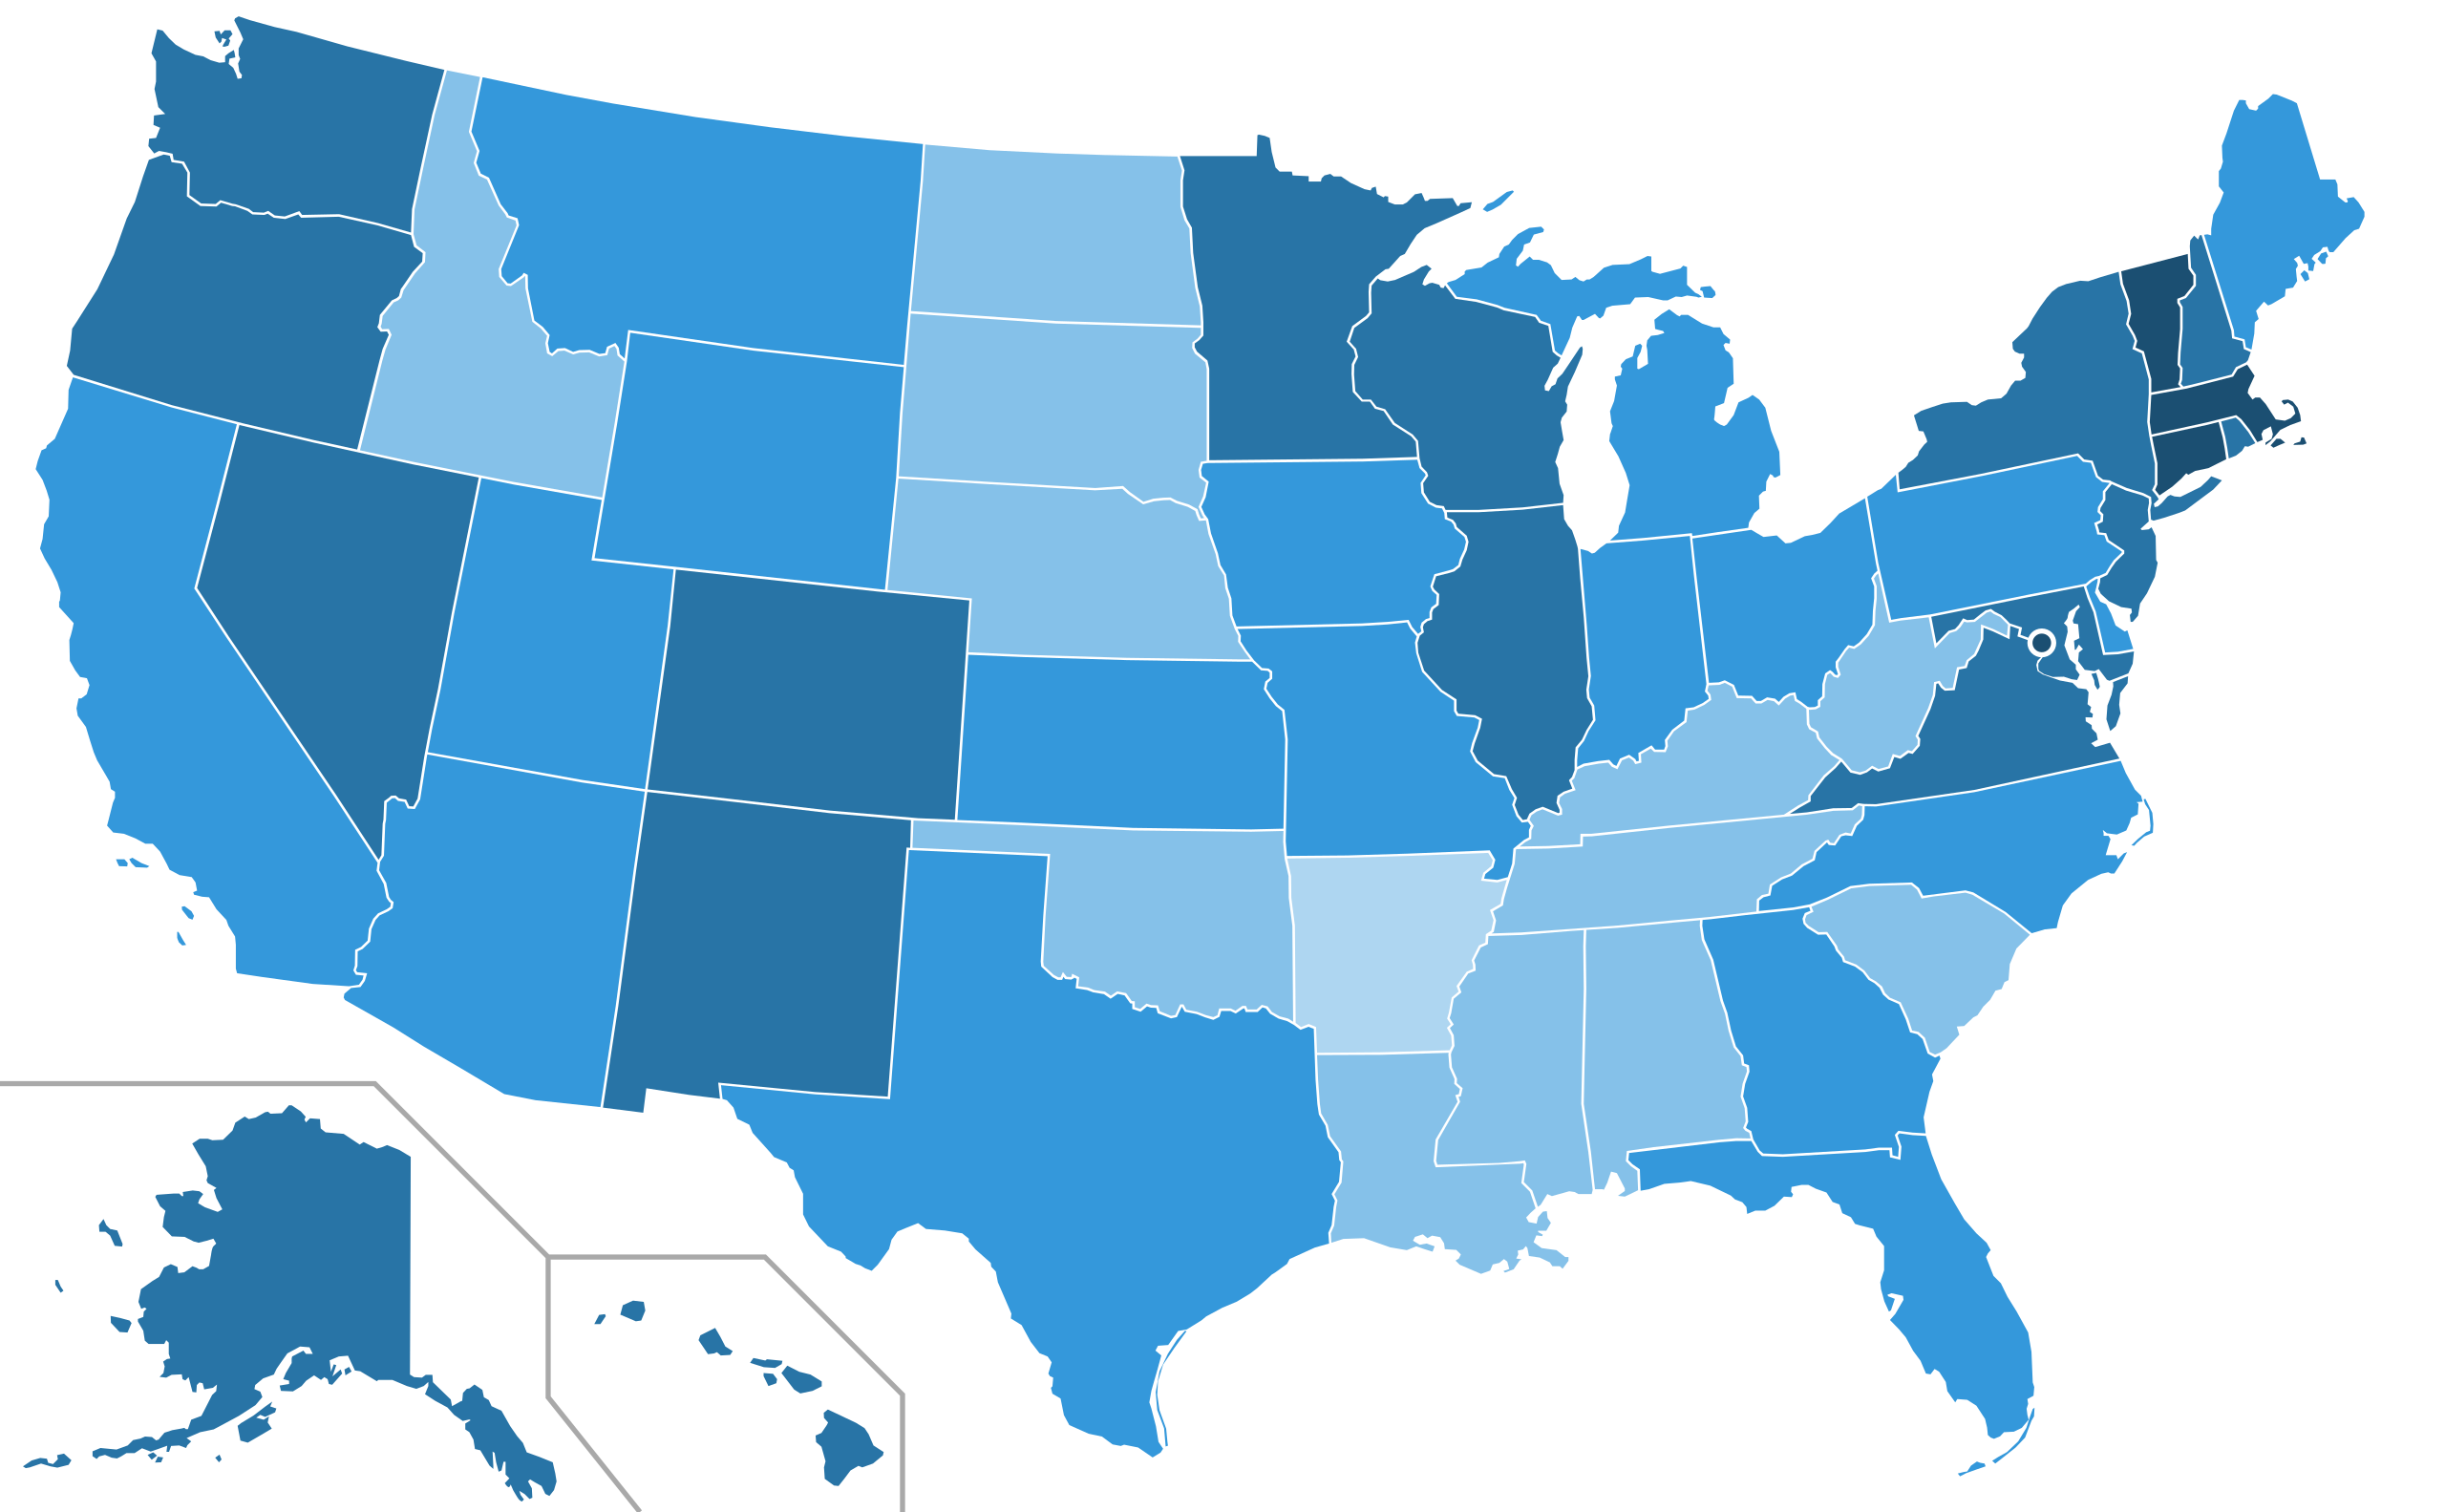 File:Public opinion of same-sex marriage in USA by state.svg - Wikipedia